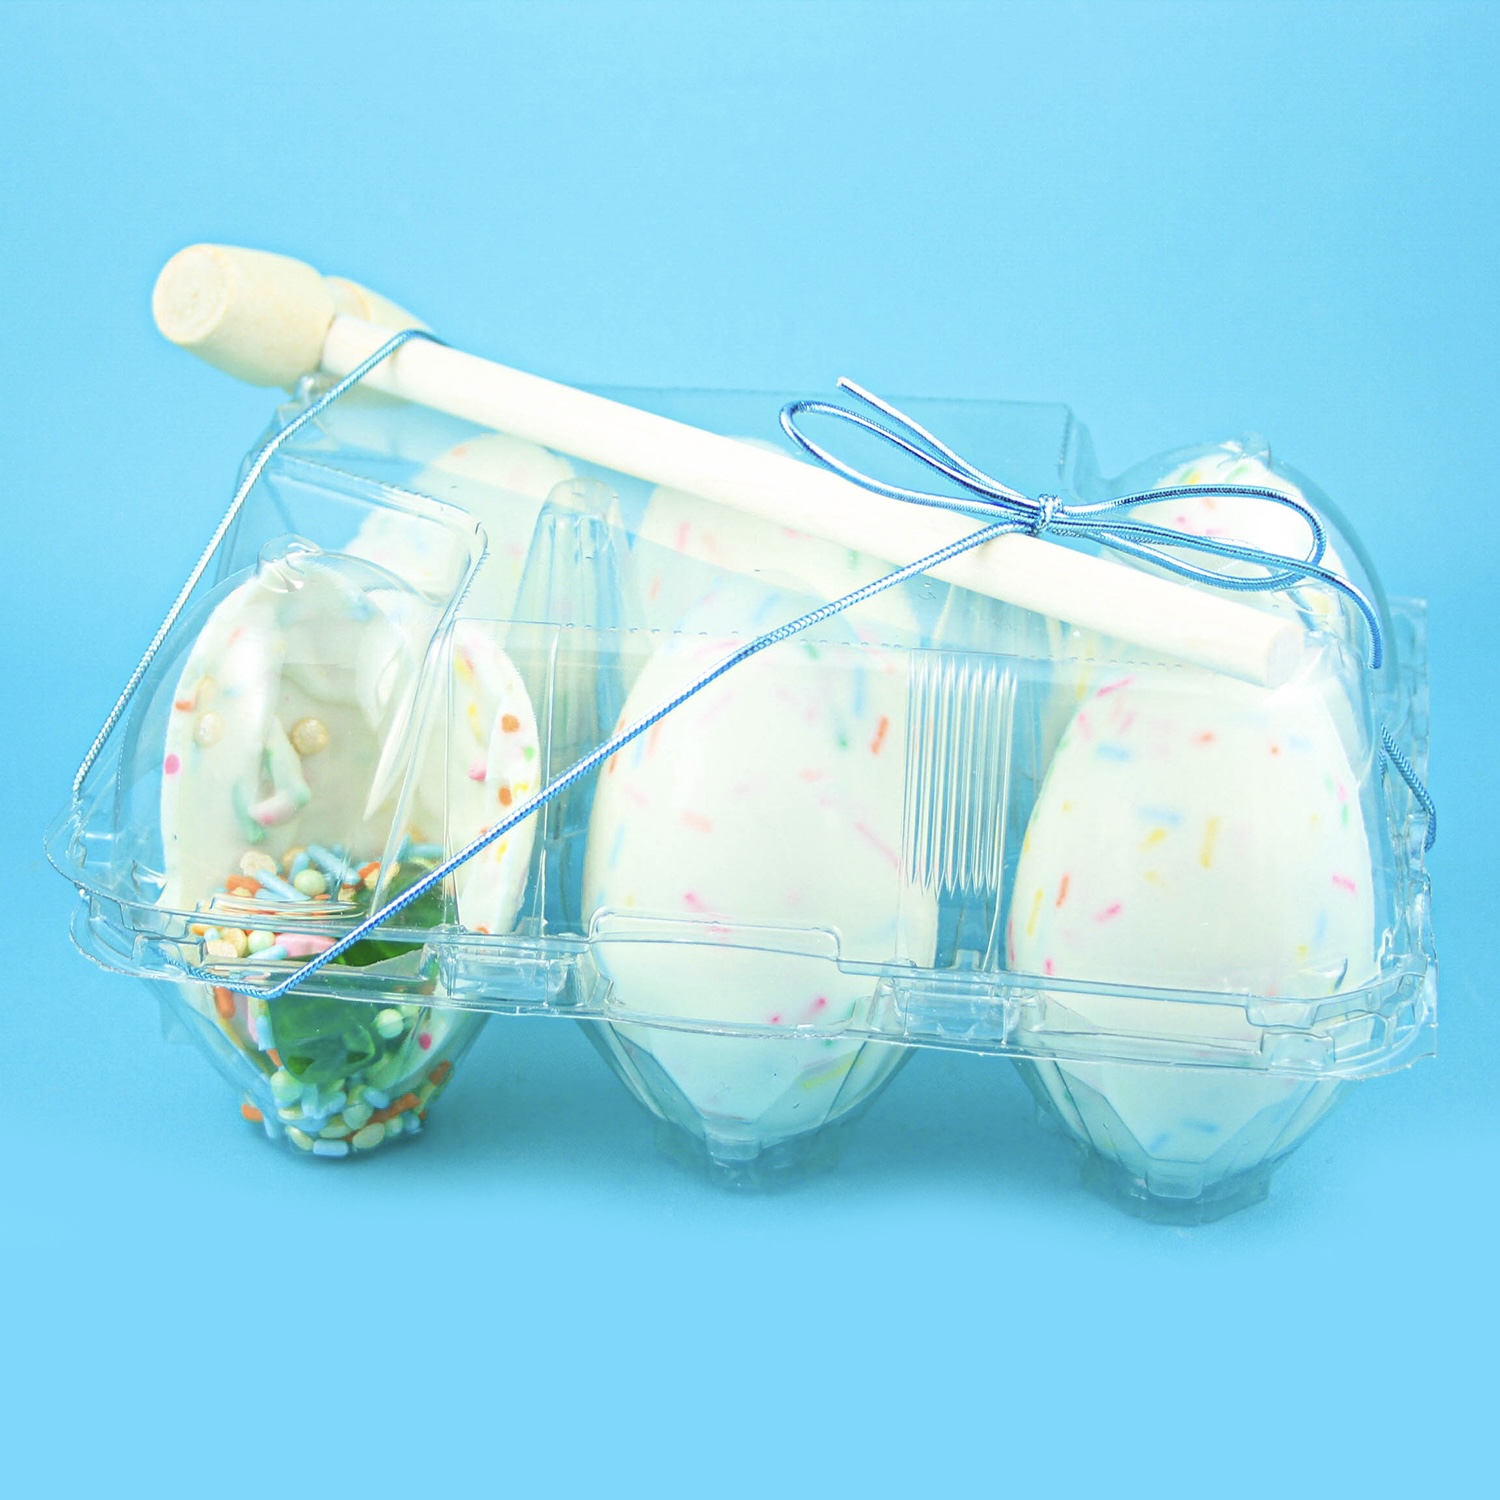 White chocolate breakable eggs packaged in clear egg carton and tied with a blue stretch and wooden hammer